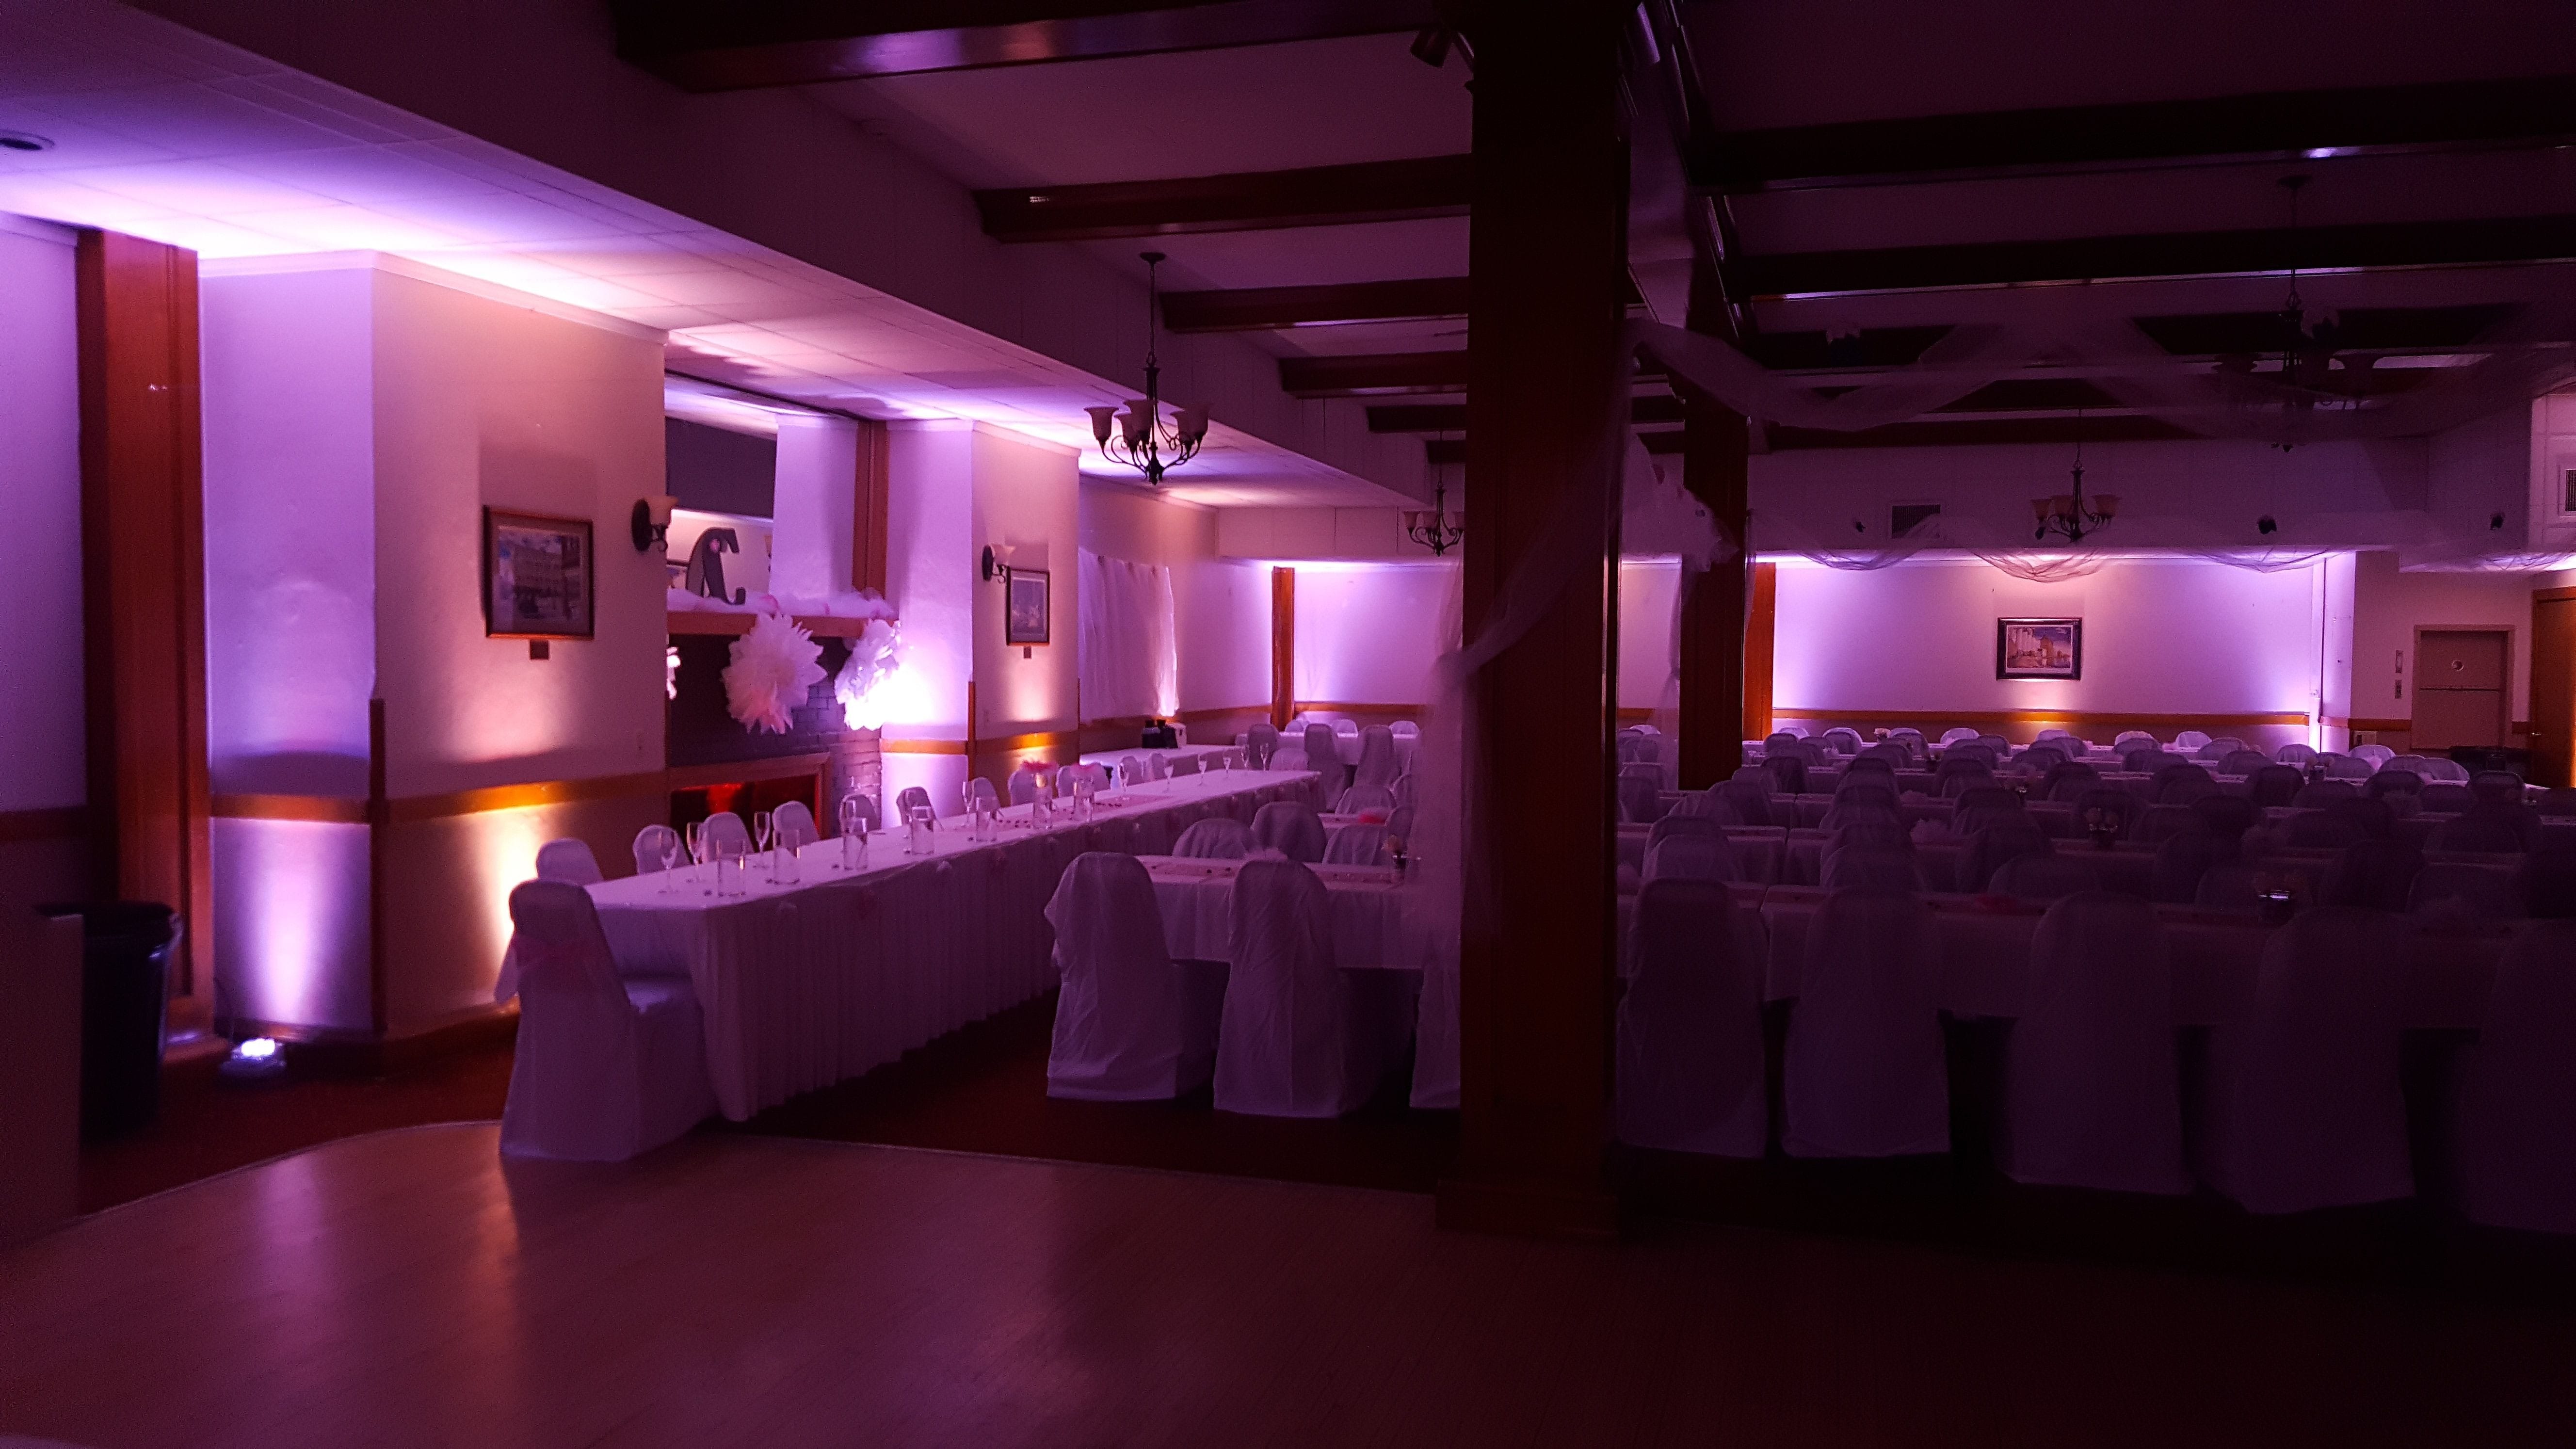 Elks Lodge, Superior.
Wedding lighting in peach and lavender.